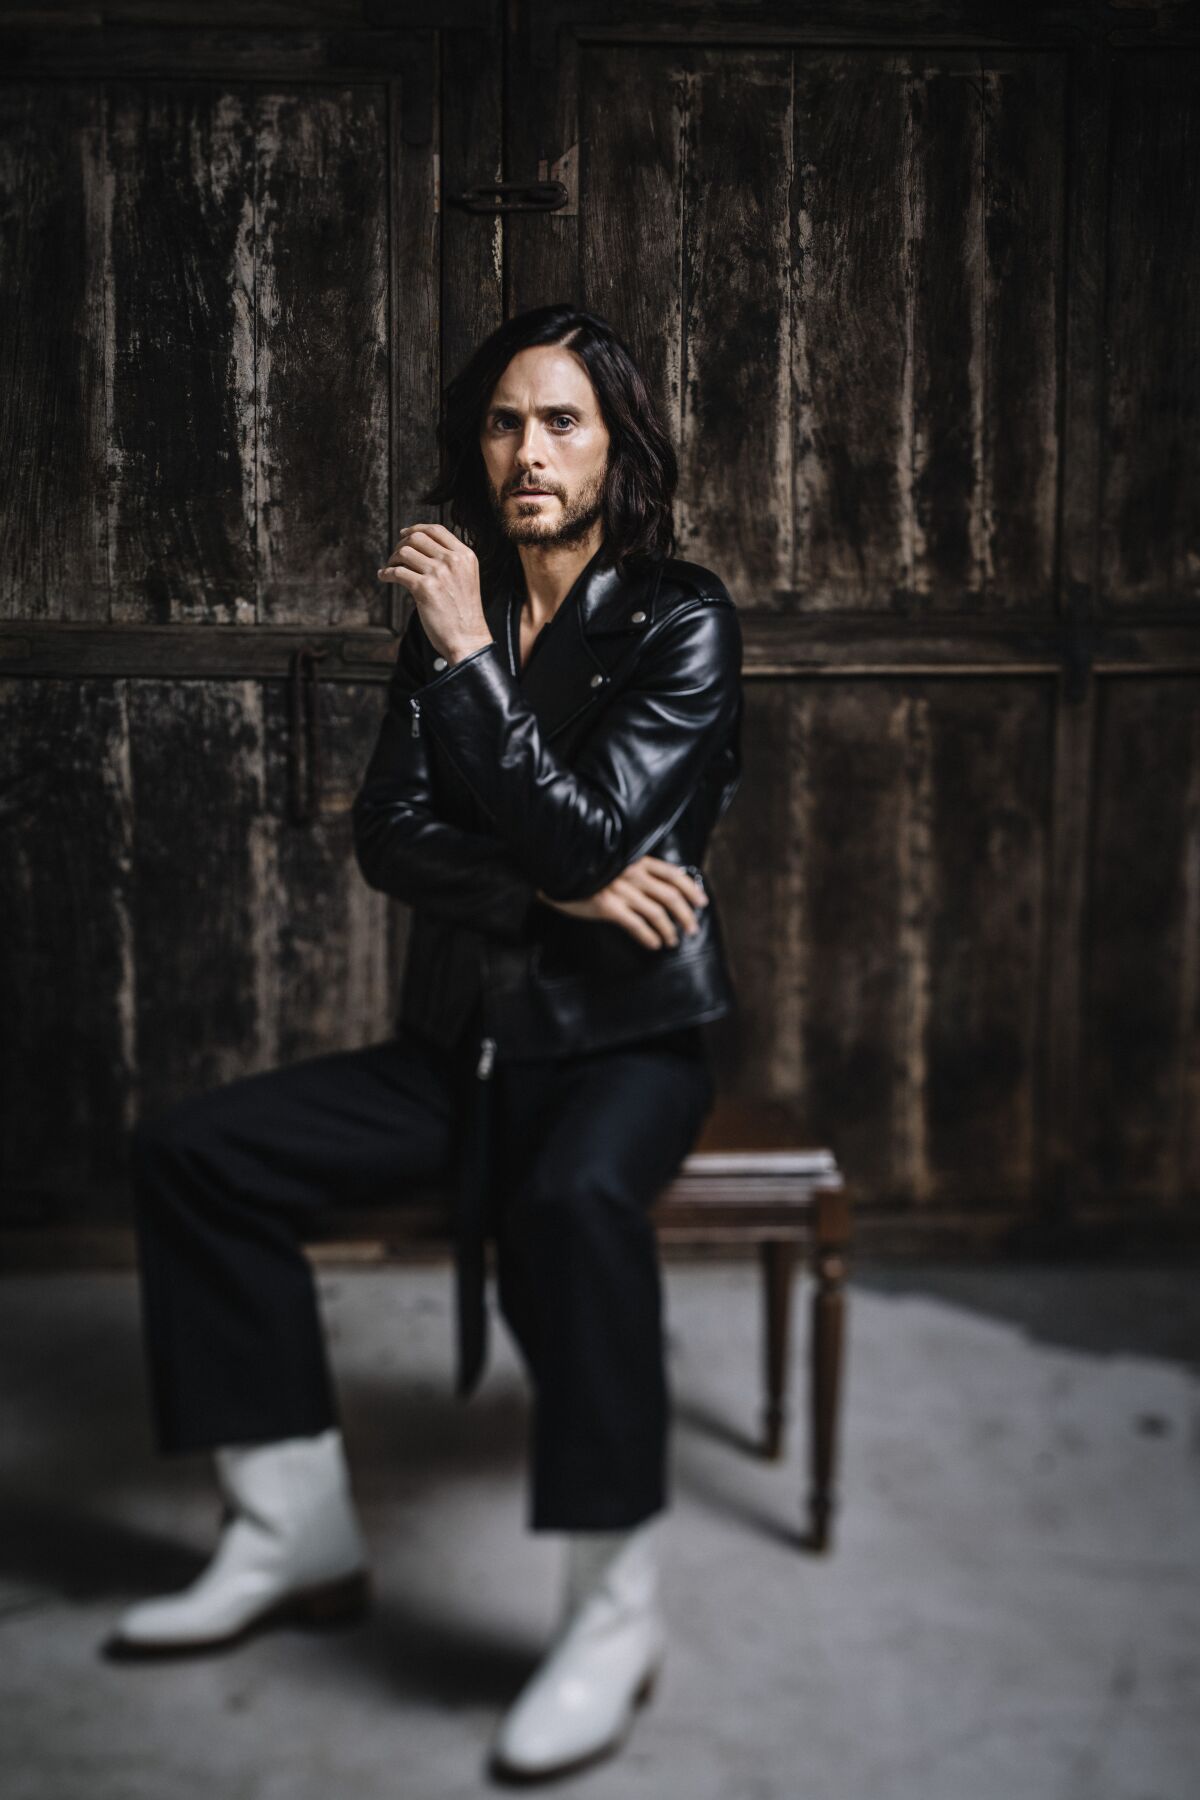 Oscar winning actor Jared Leto is photographed at home